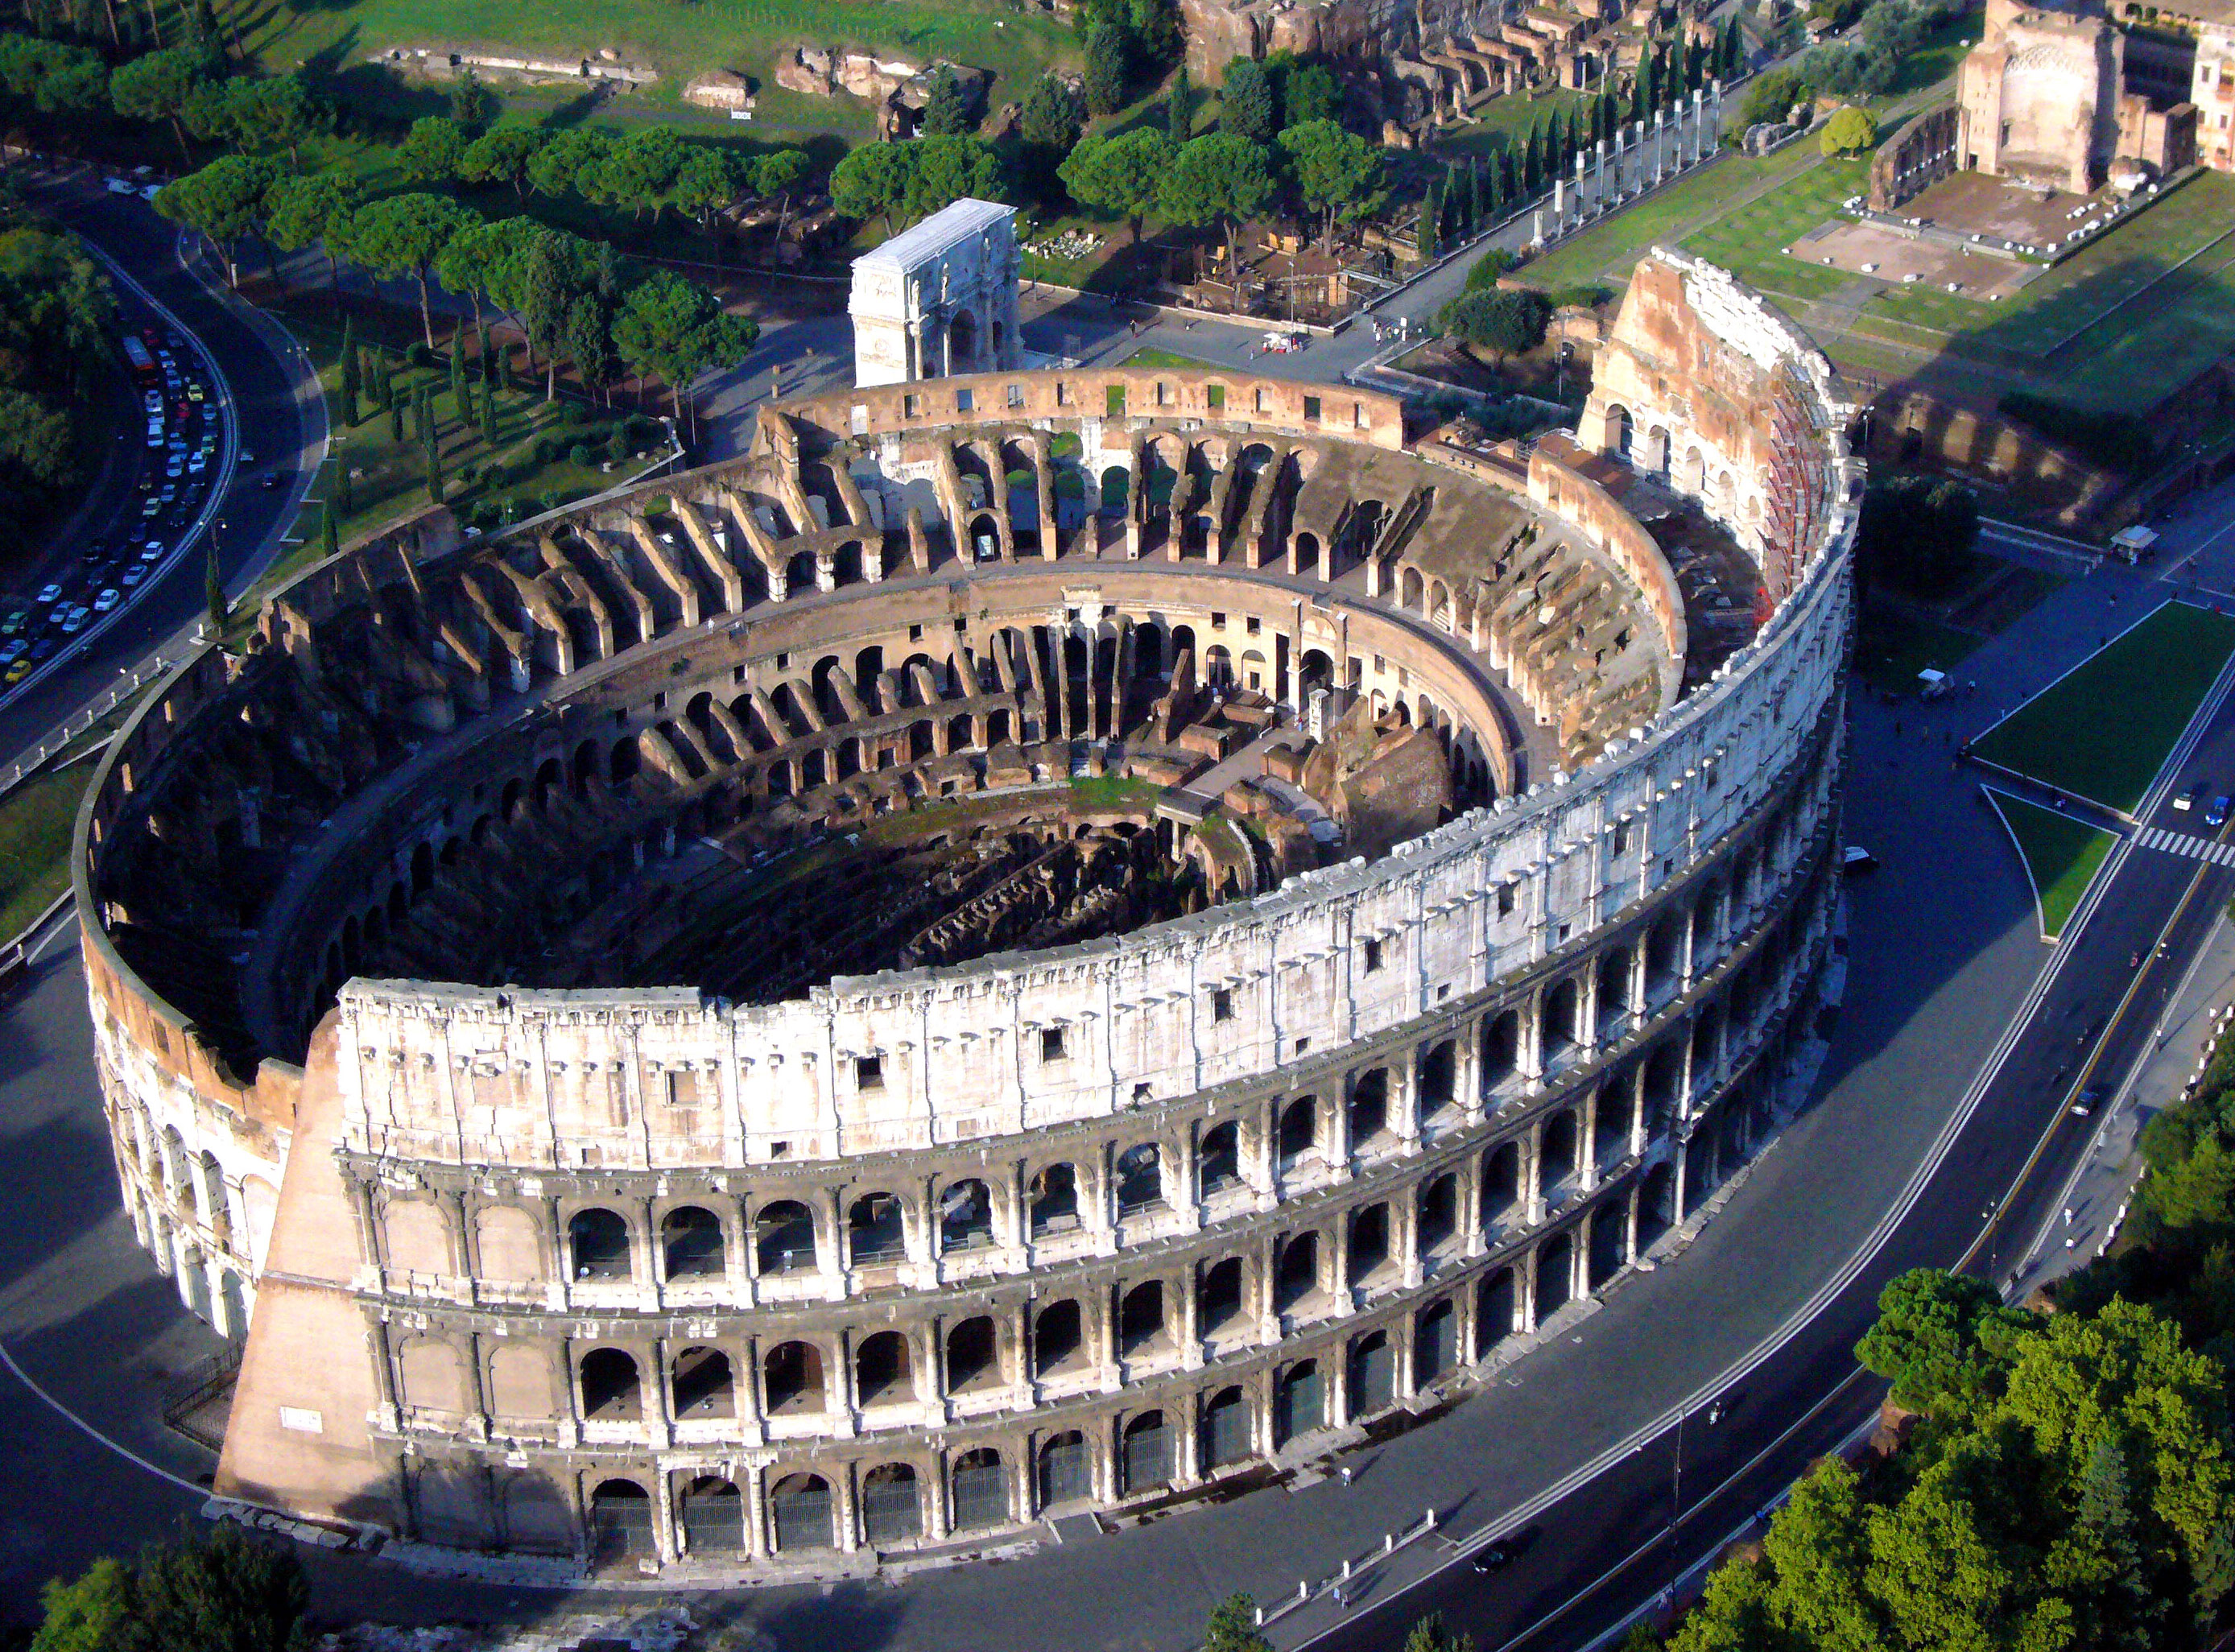 Rome's Colosseum, one of the Seven Wonders of the World